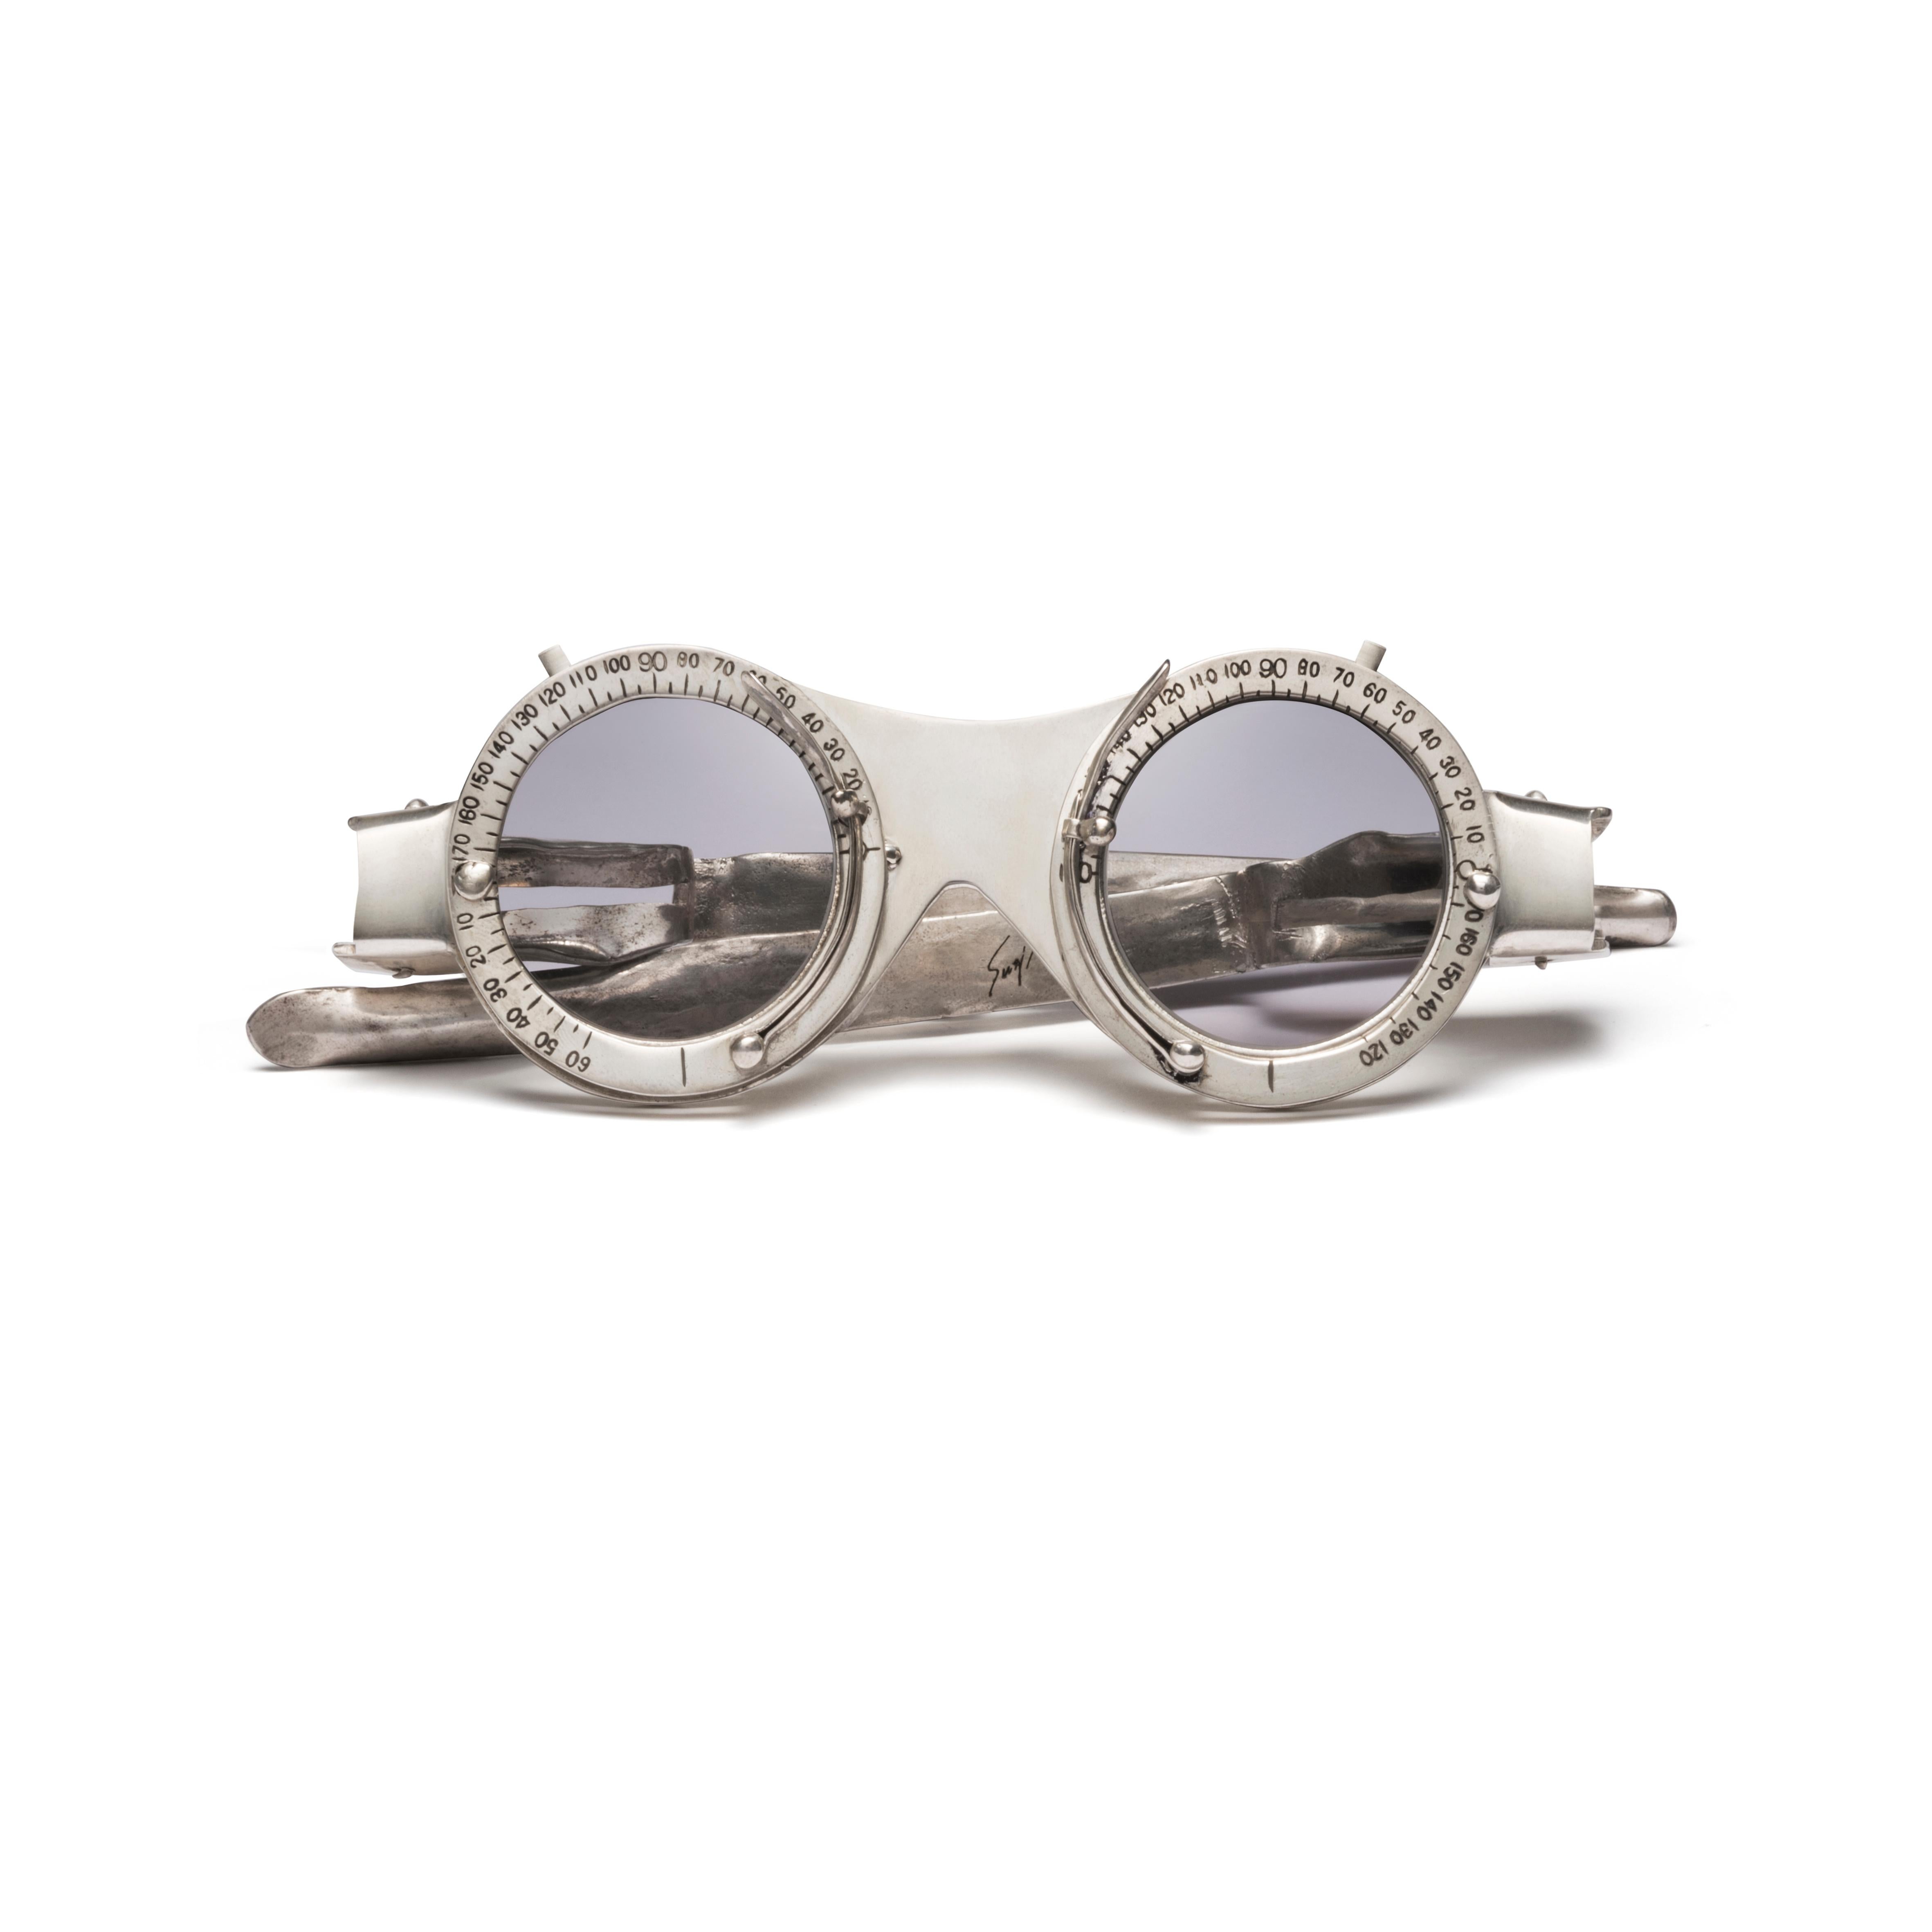 One sterling silver eyeglasses, seven pairs of interchangeable tinted lenses, one Lacquer box with platinum foil

Produced by Lizworks and Selima Optique.

“Oculist Witness” is comprised of a pair of sterling silver frames with a palette of